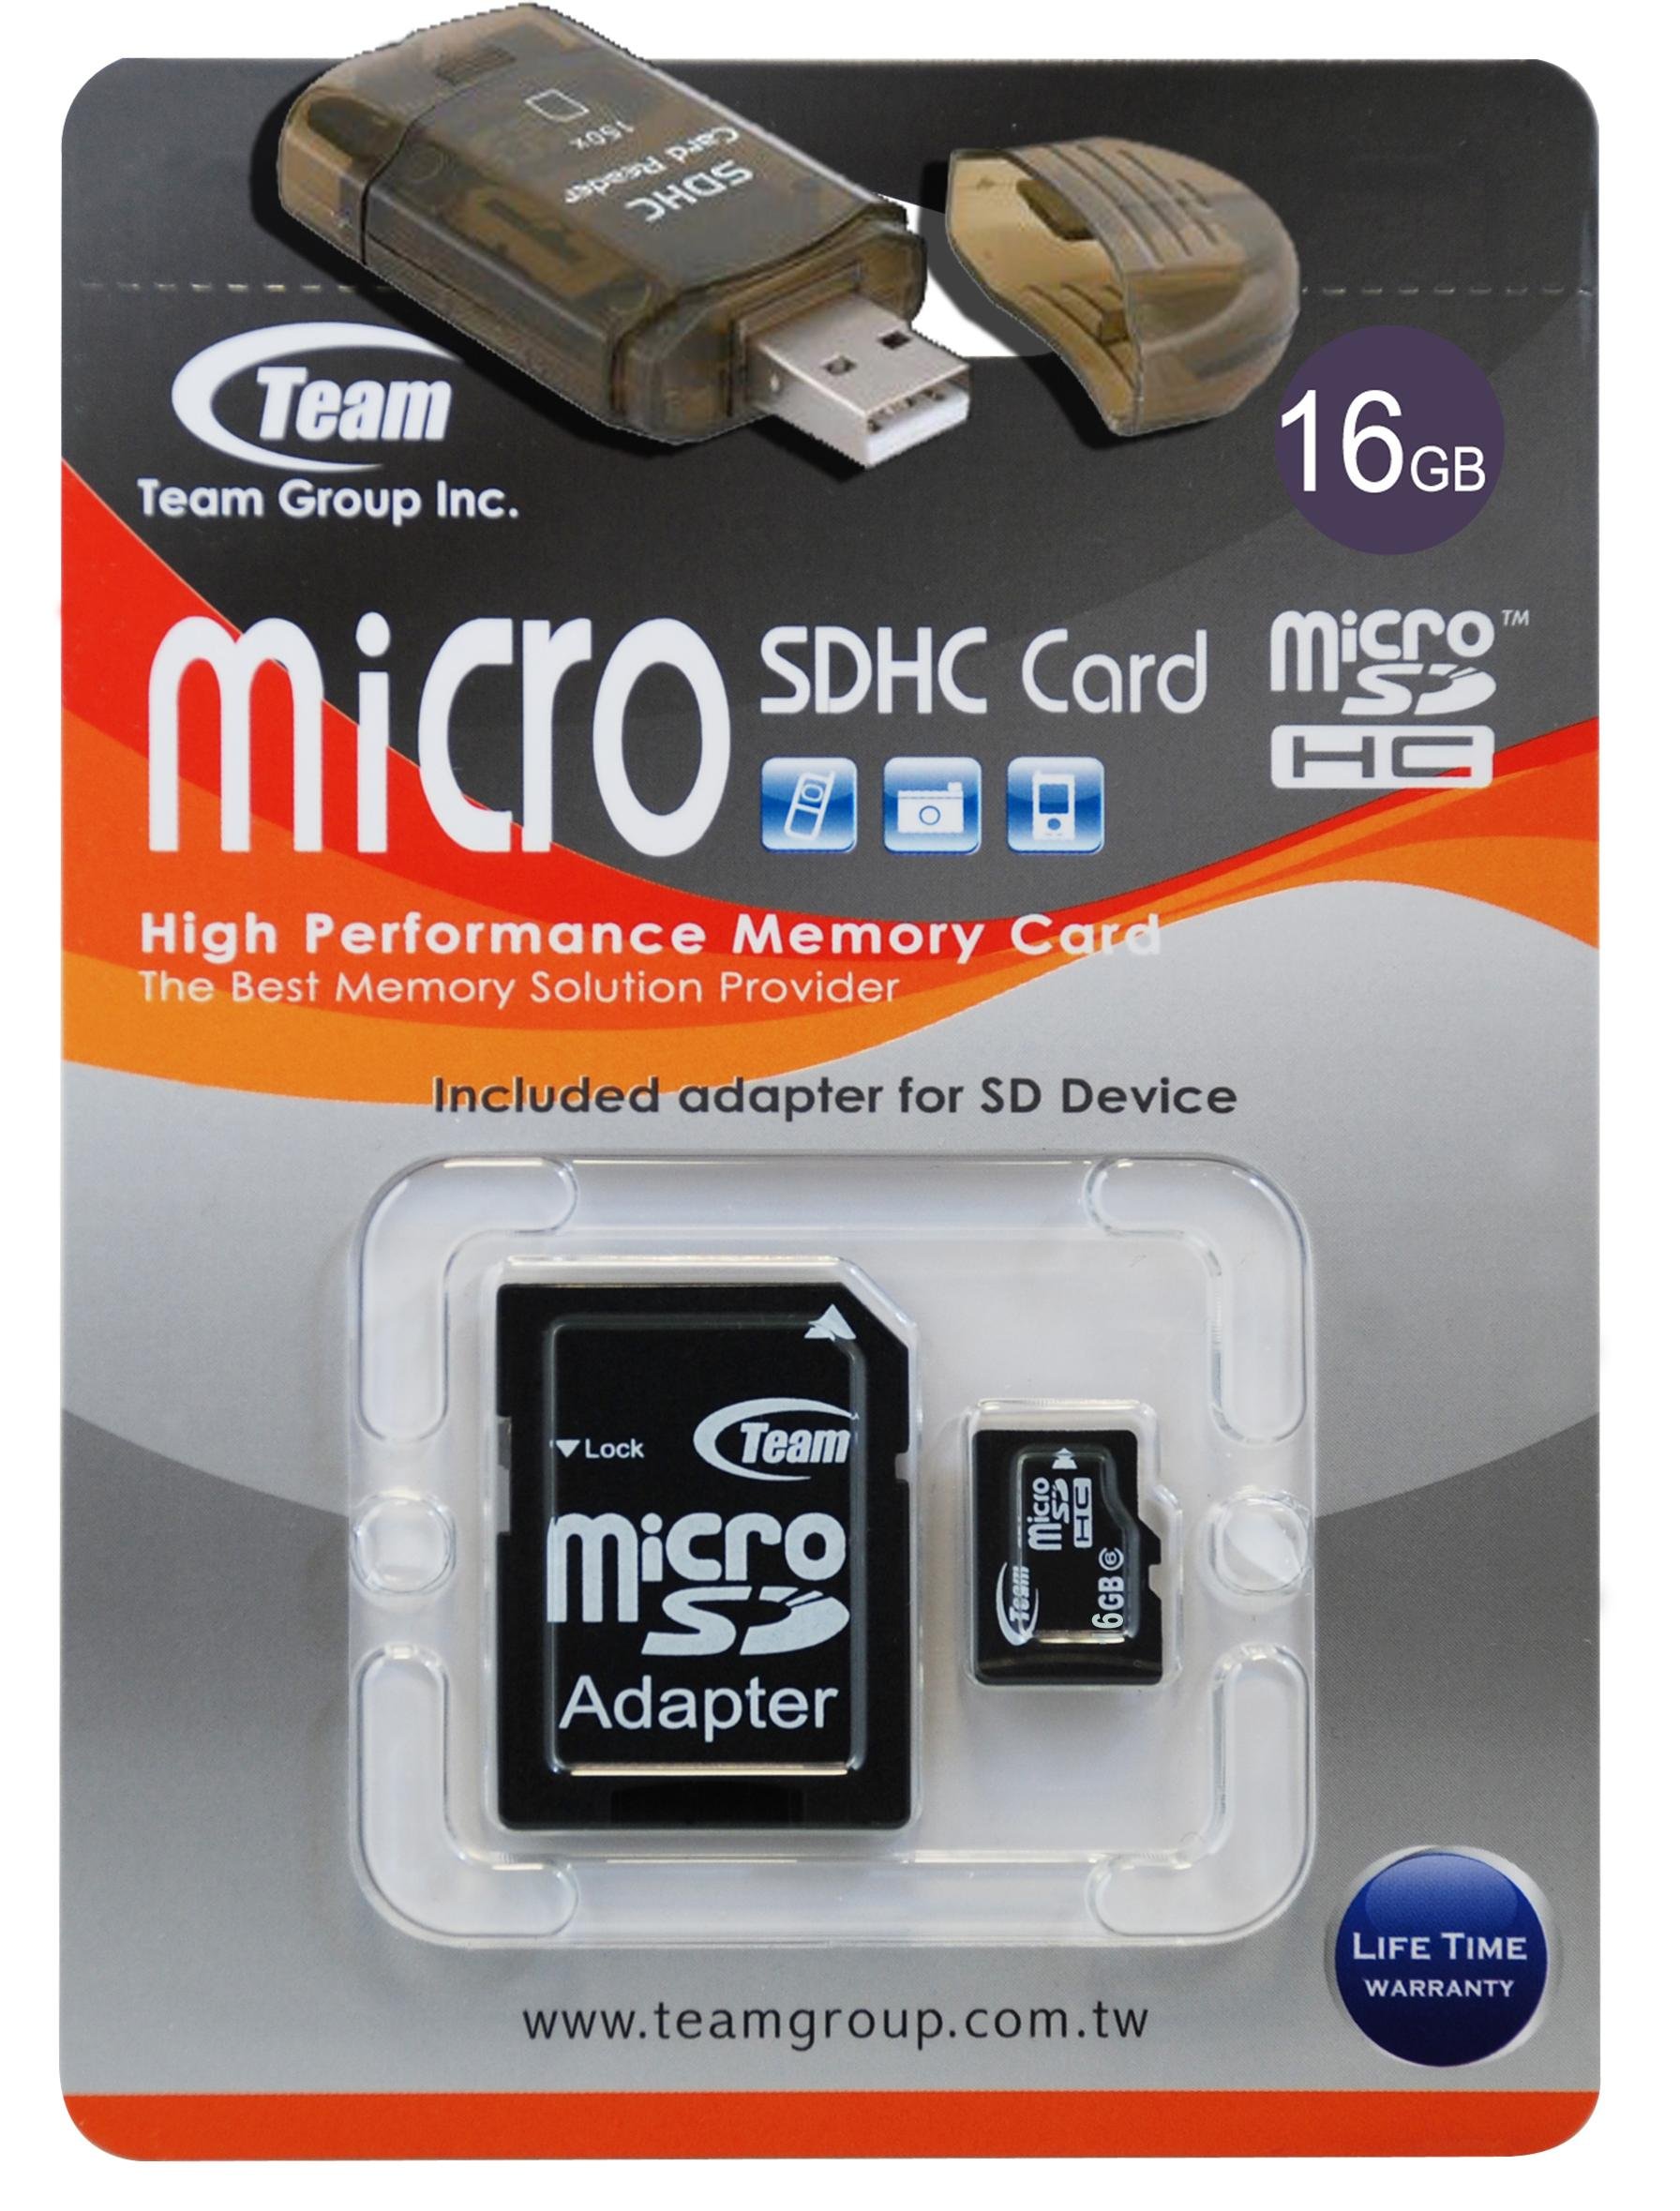 16GB Turbo Speed Class 6 MicroSDHC Memory Card For SAMSUNG S5150 S5233 S5560. High Speed Card Comes with a free SD and USB Ad